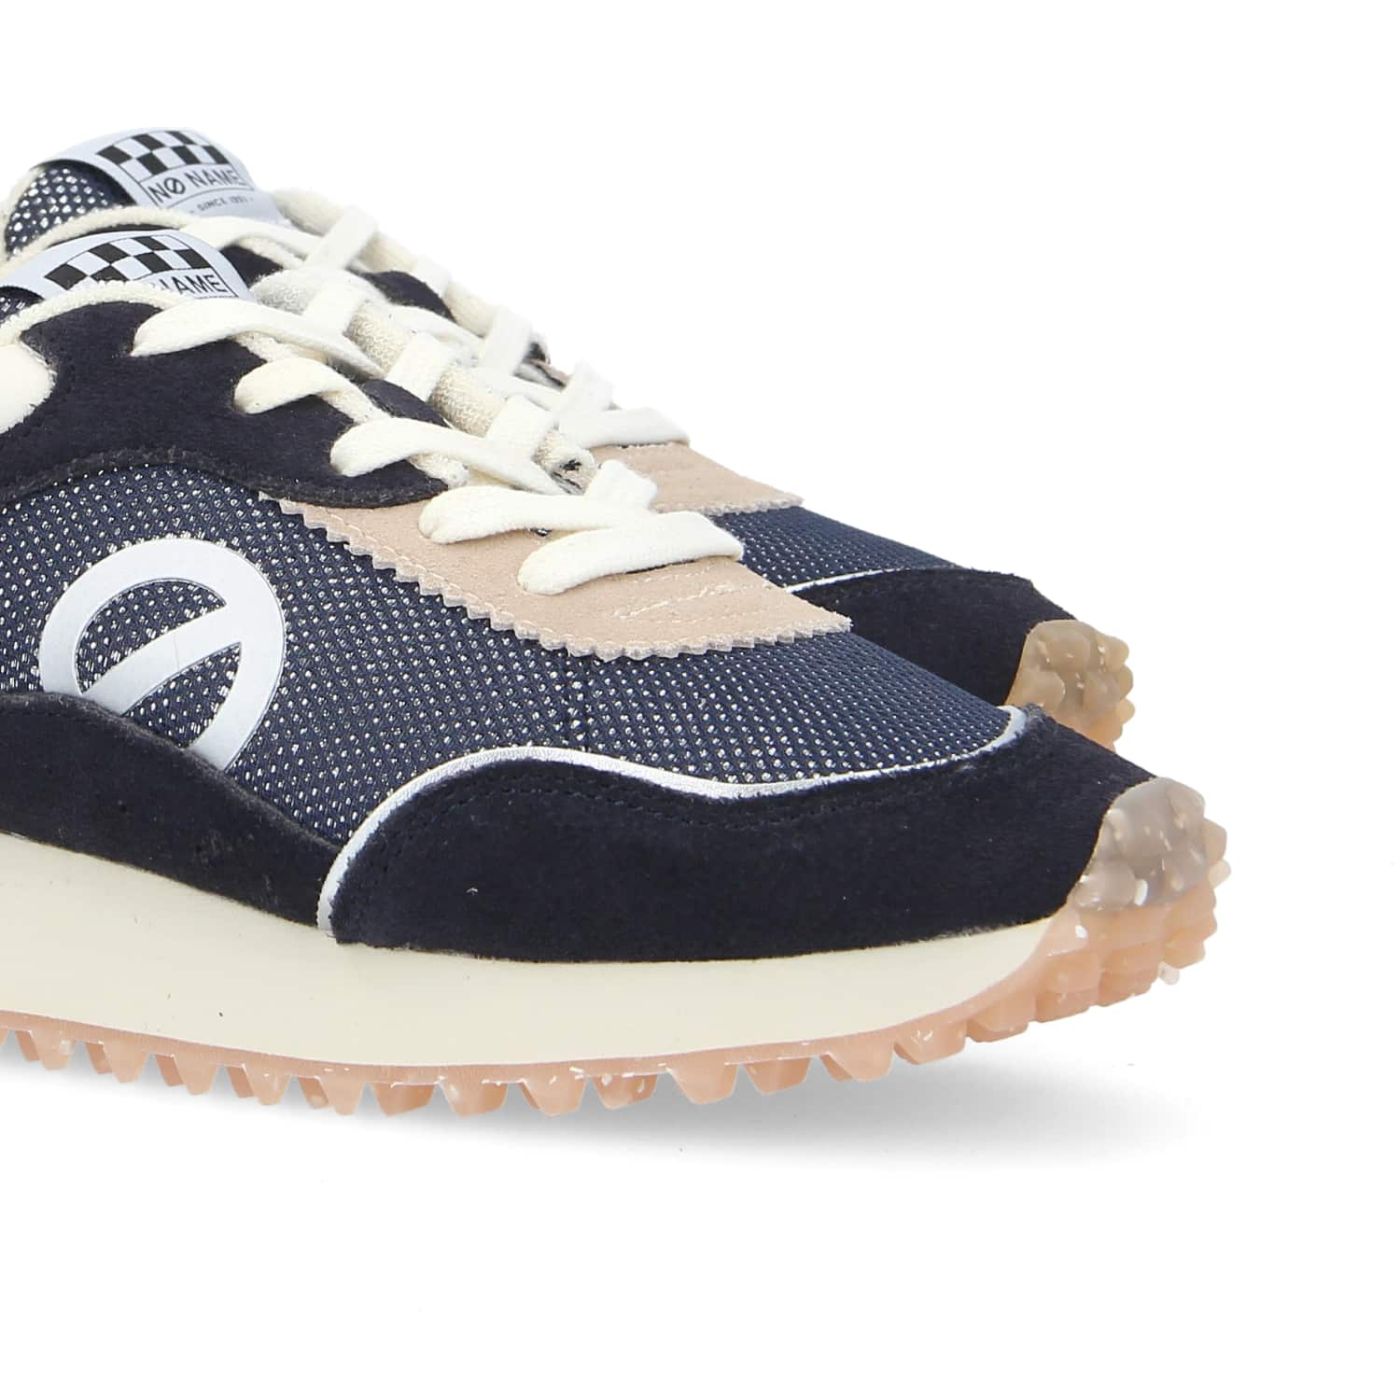 PUNKY JOGGER W - SUEDE/SH.MESH - NAVY